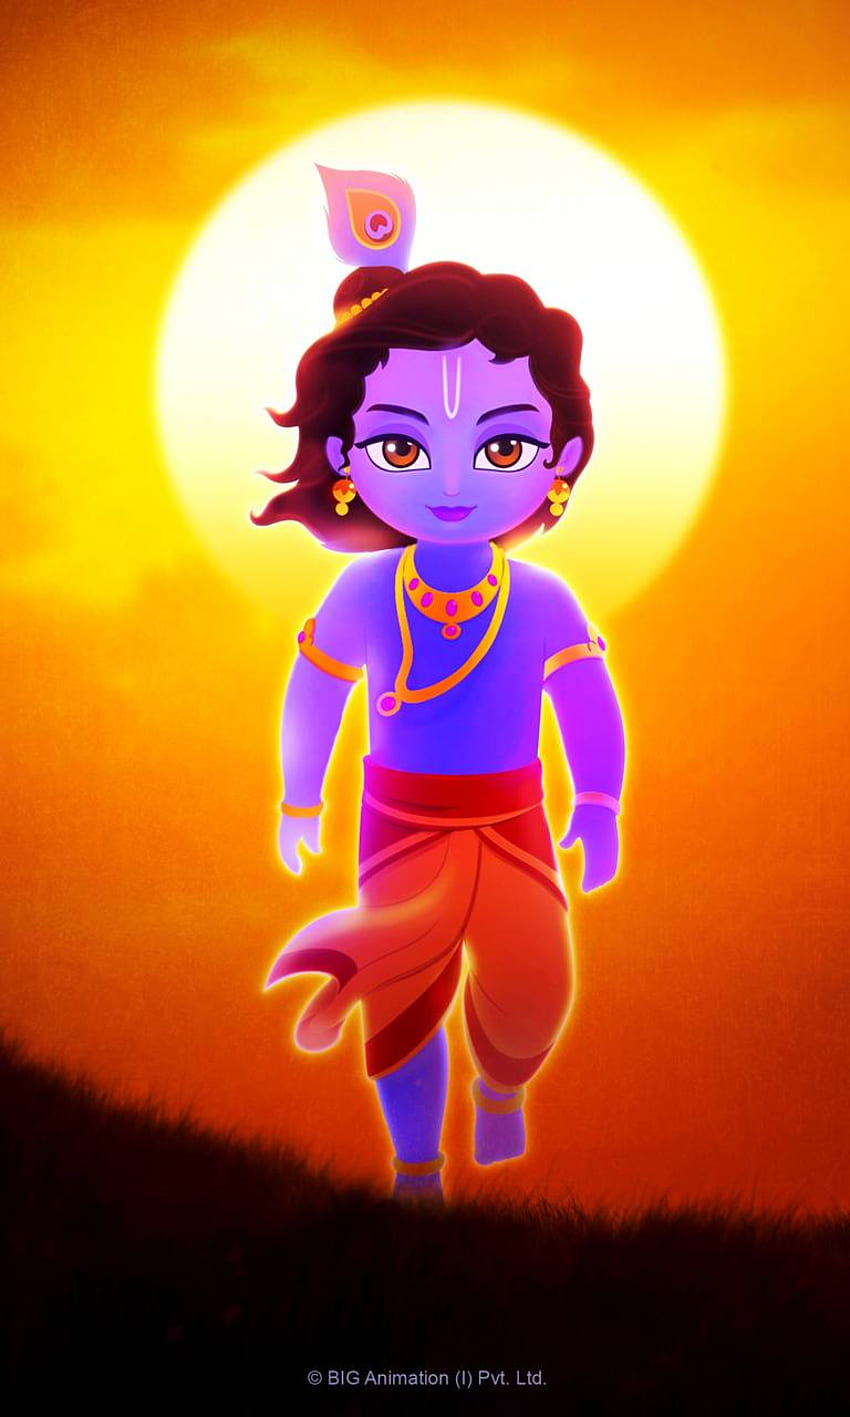 Top 999+ animated cute little krishna images – Amazing Collection animated cute little krishna images Full 4K